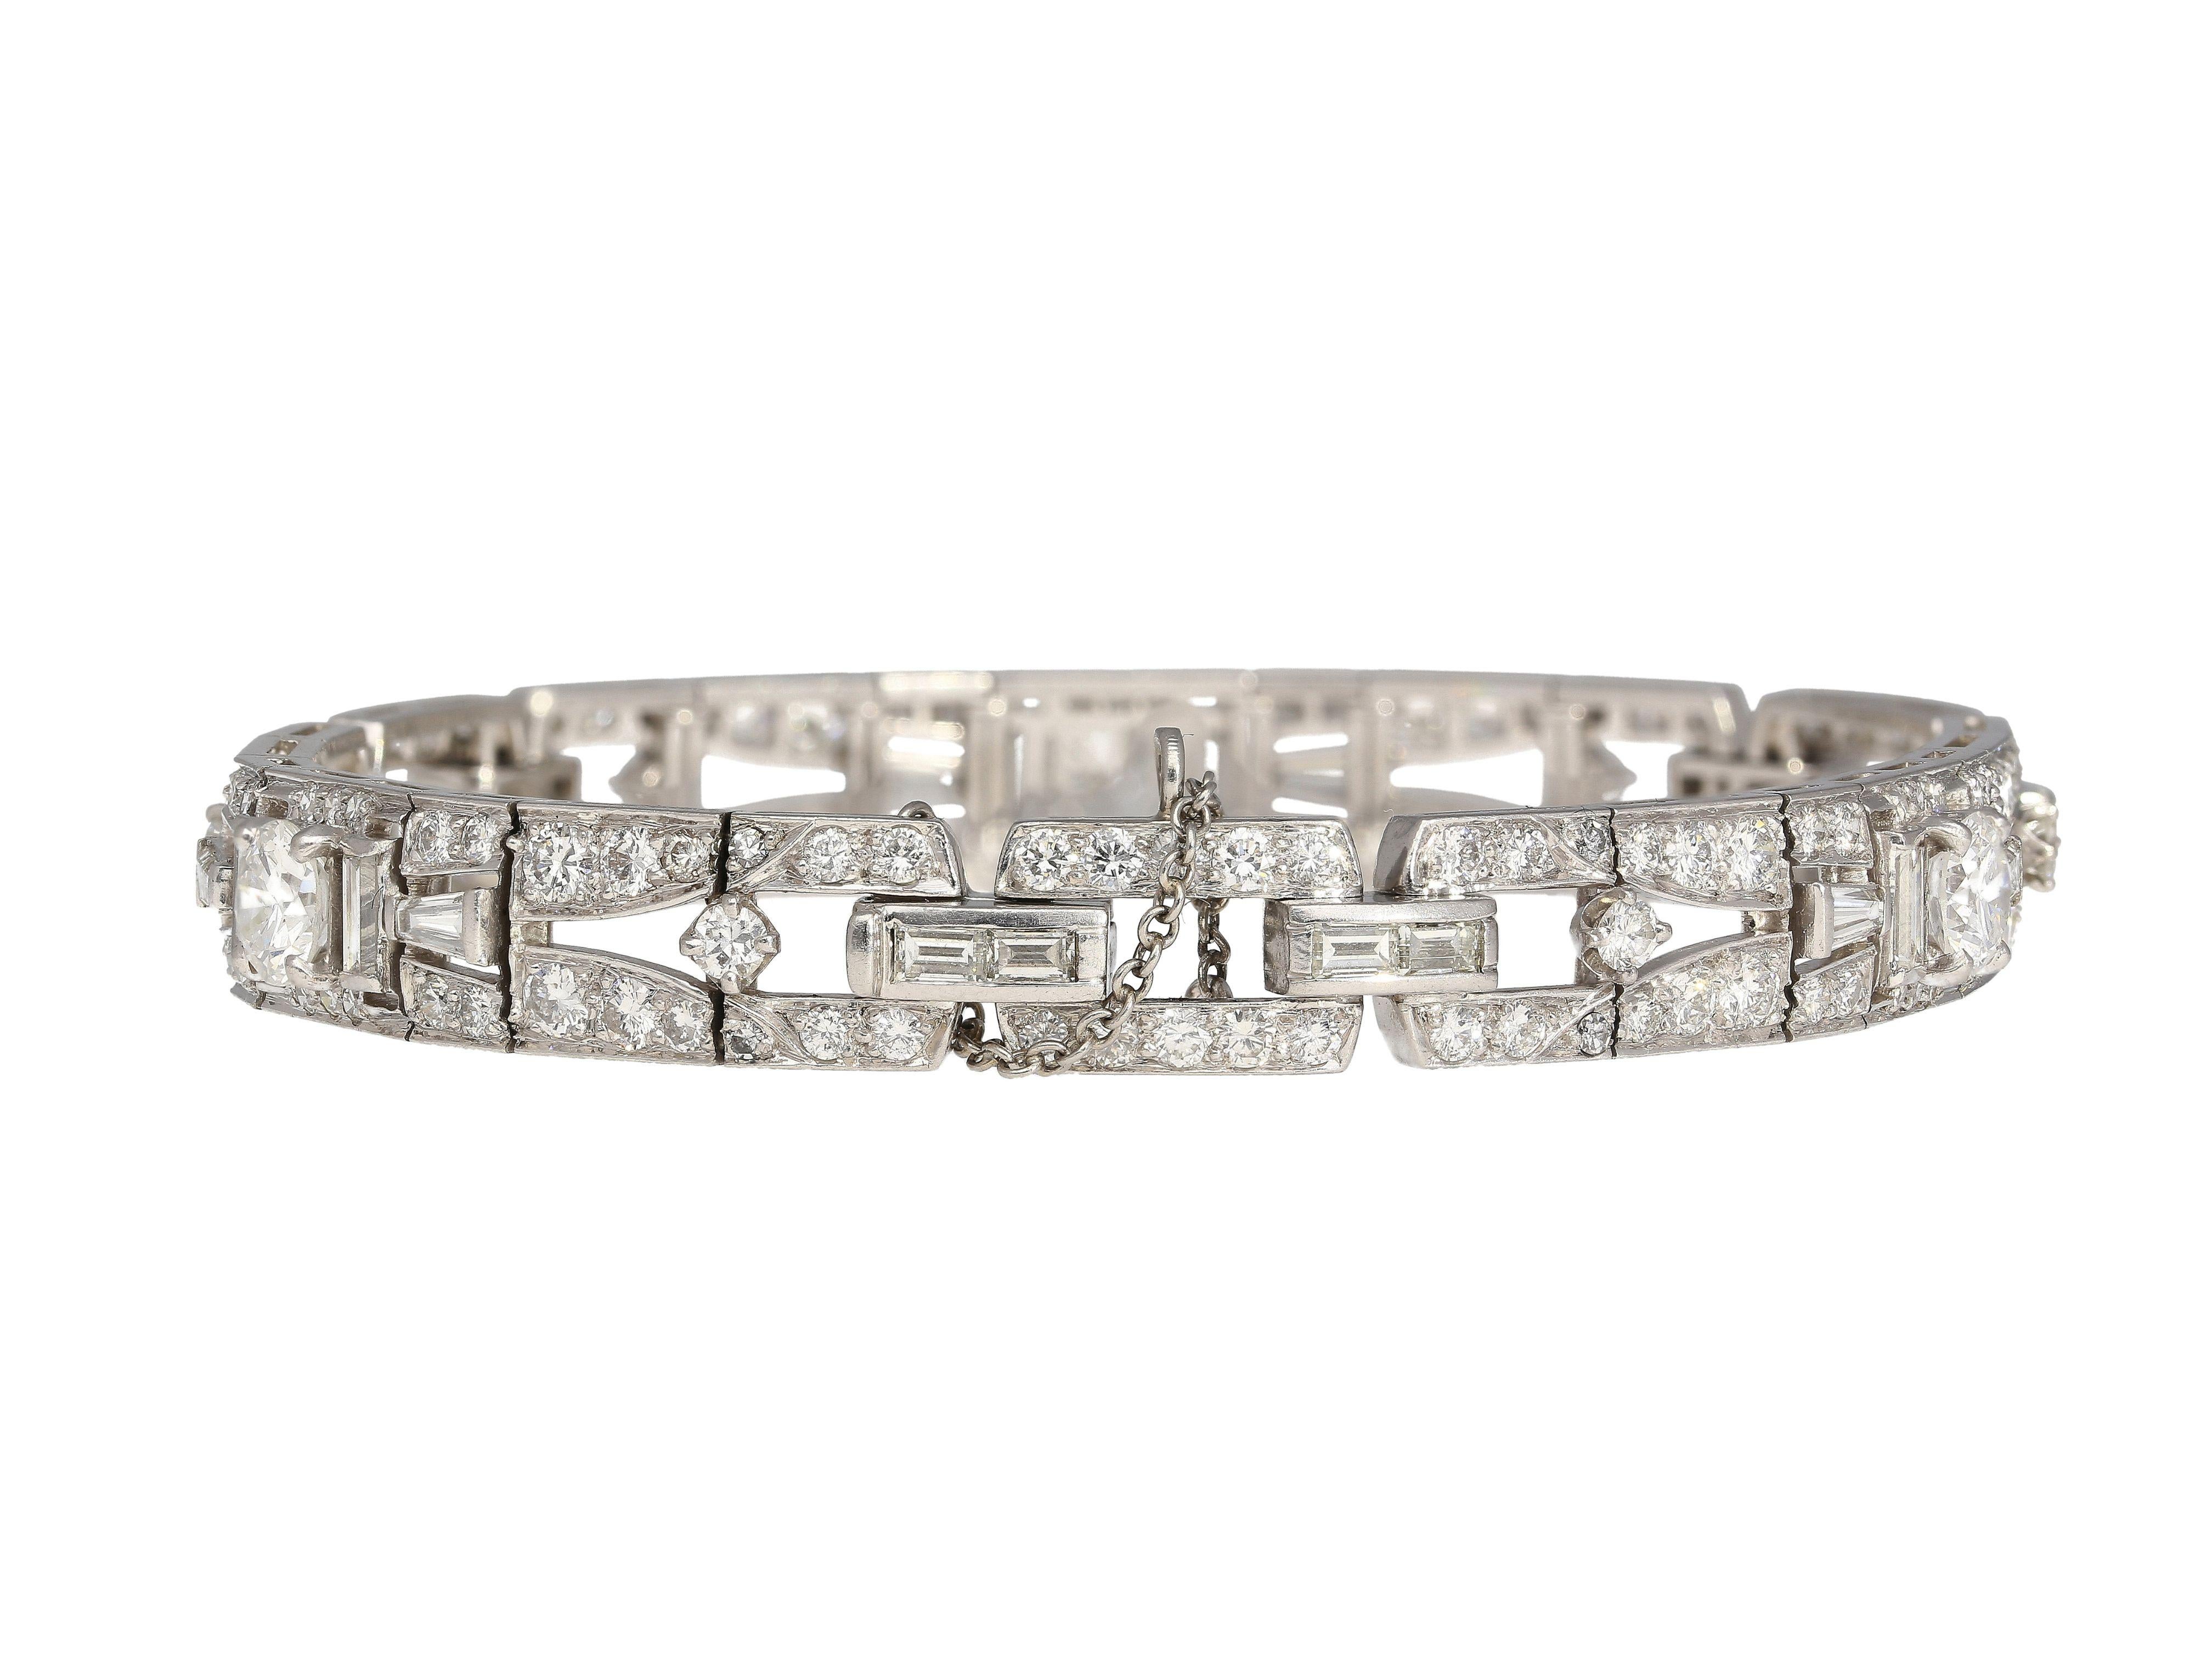 Exquisite 10-Carat Total Natural Diamond Vintage Bracelet.

Step into a world of timeless beauty with our vintage bracelet, a relic from the 1930s. This captivating piece showcases a stunning array of round and baguette cut diamonds, totaling 10